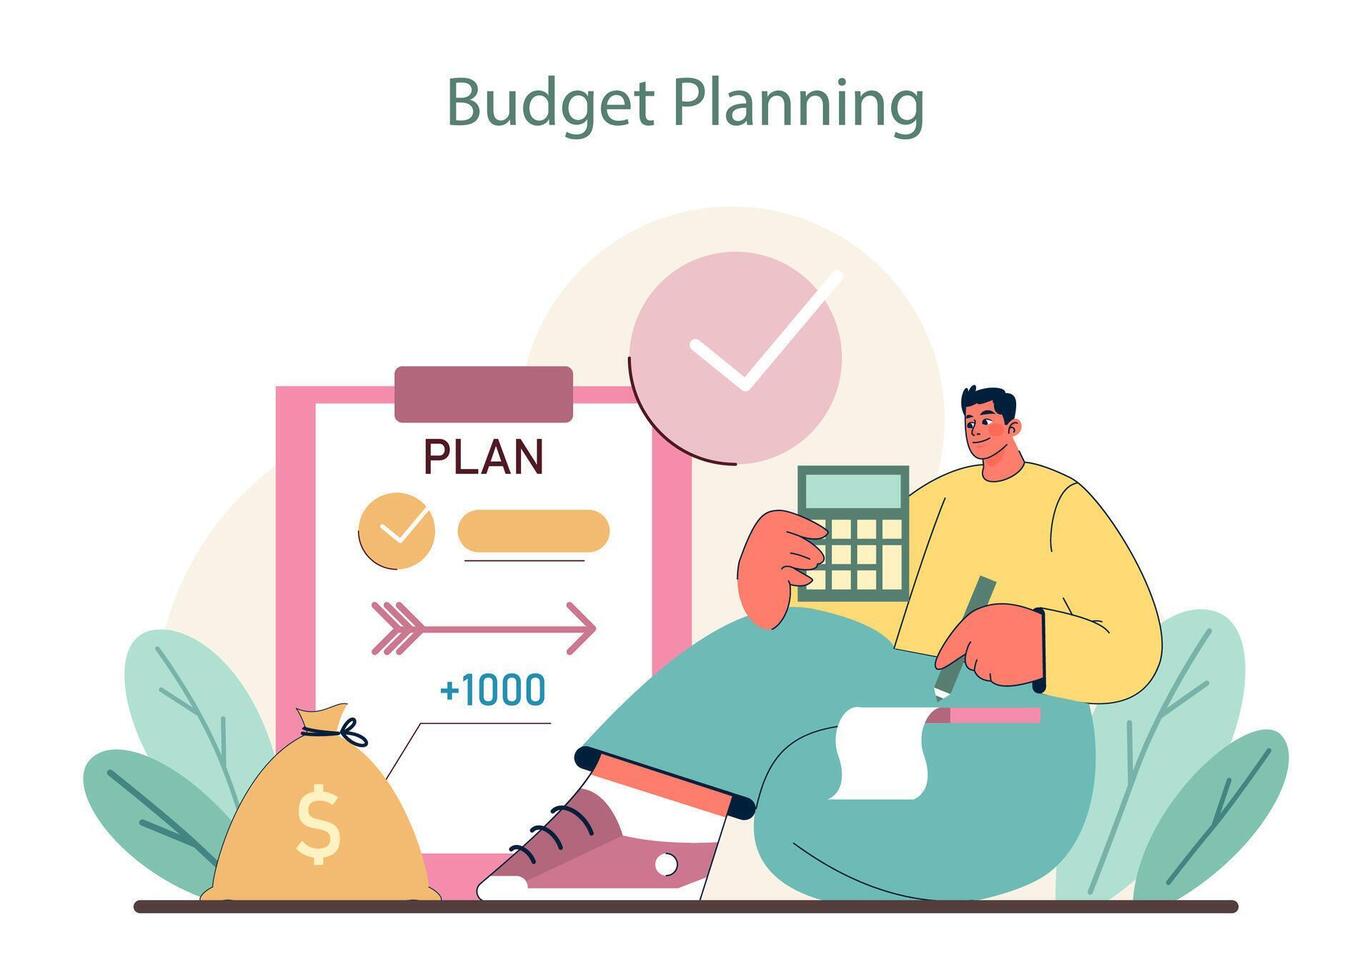 Budget Planning concept. Illustrating financial foresight with calculative saving and expenditure tracking. vector